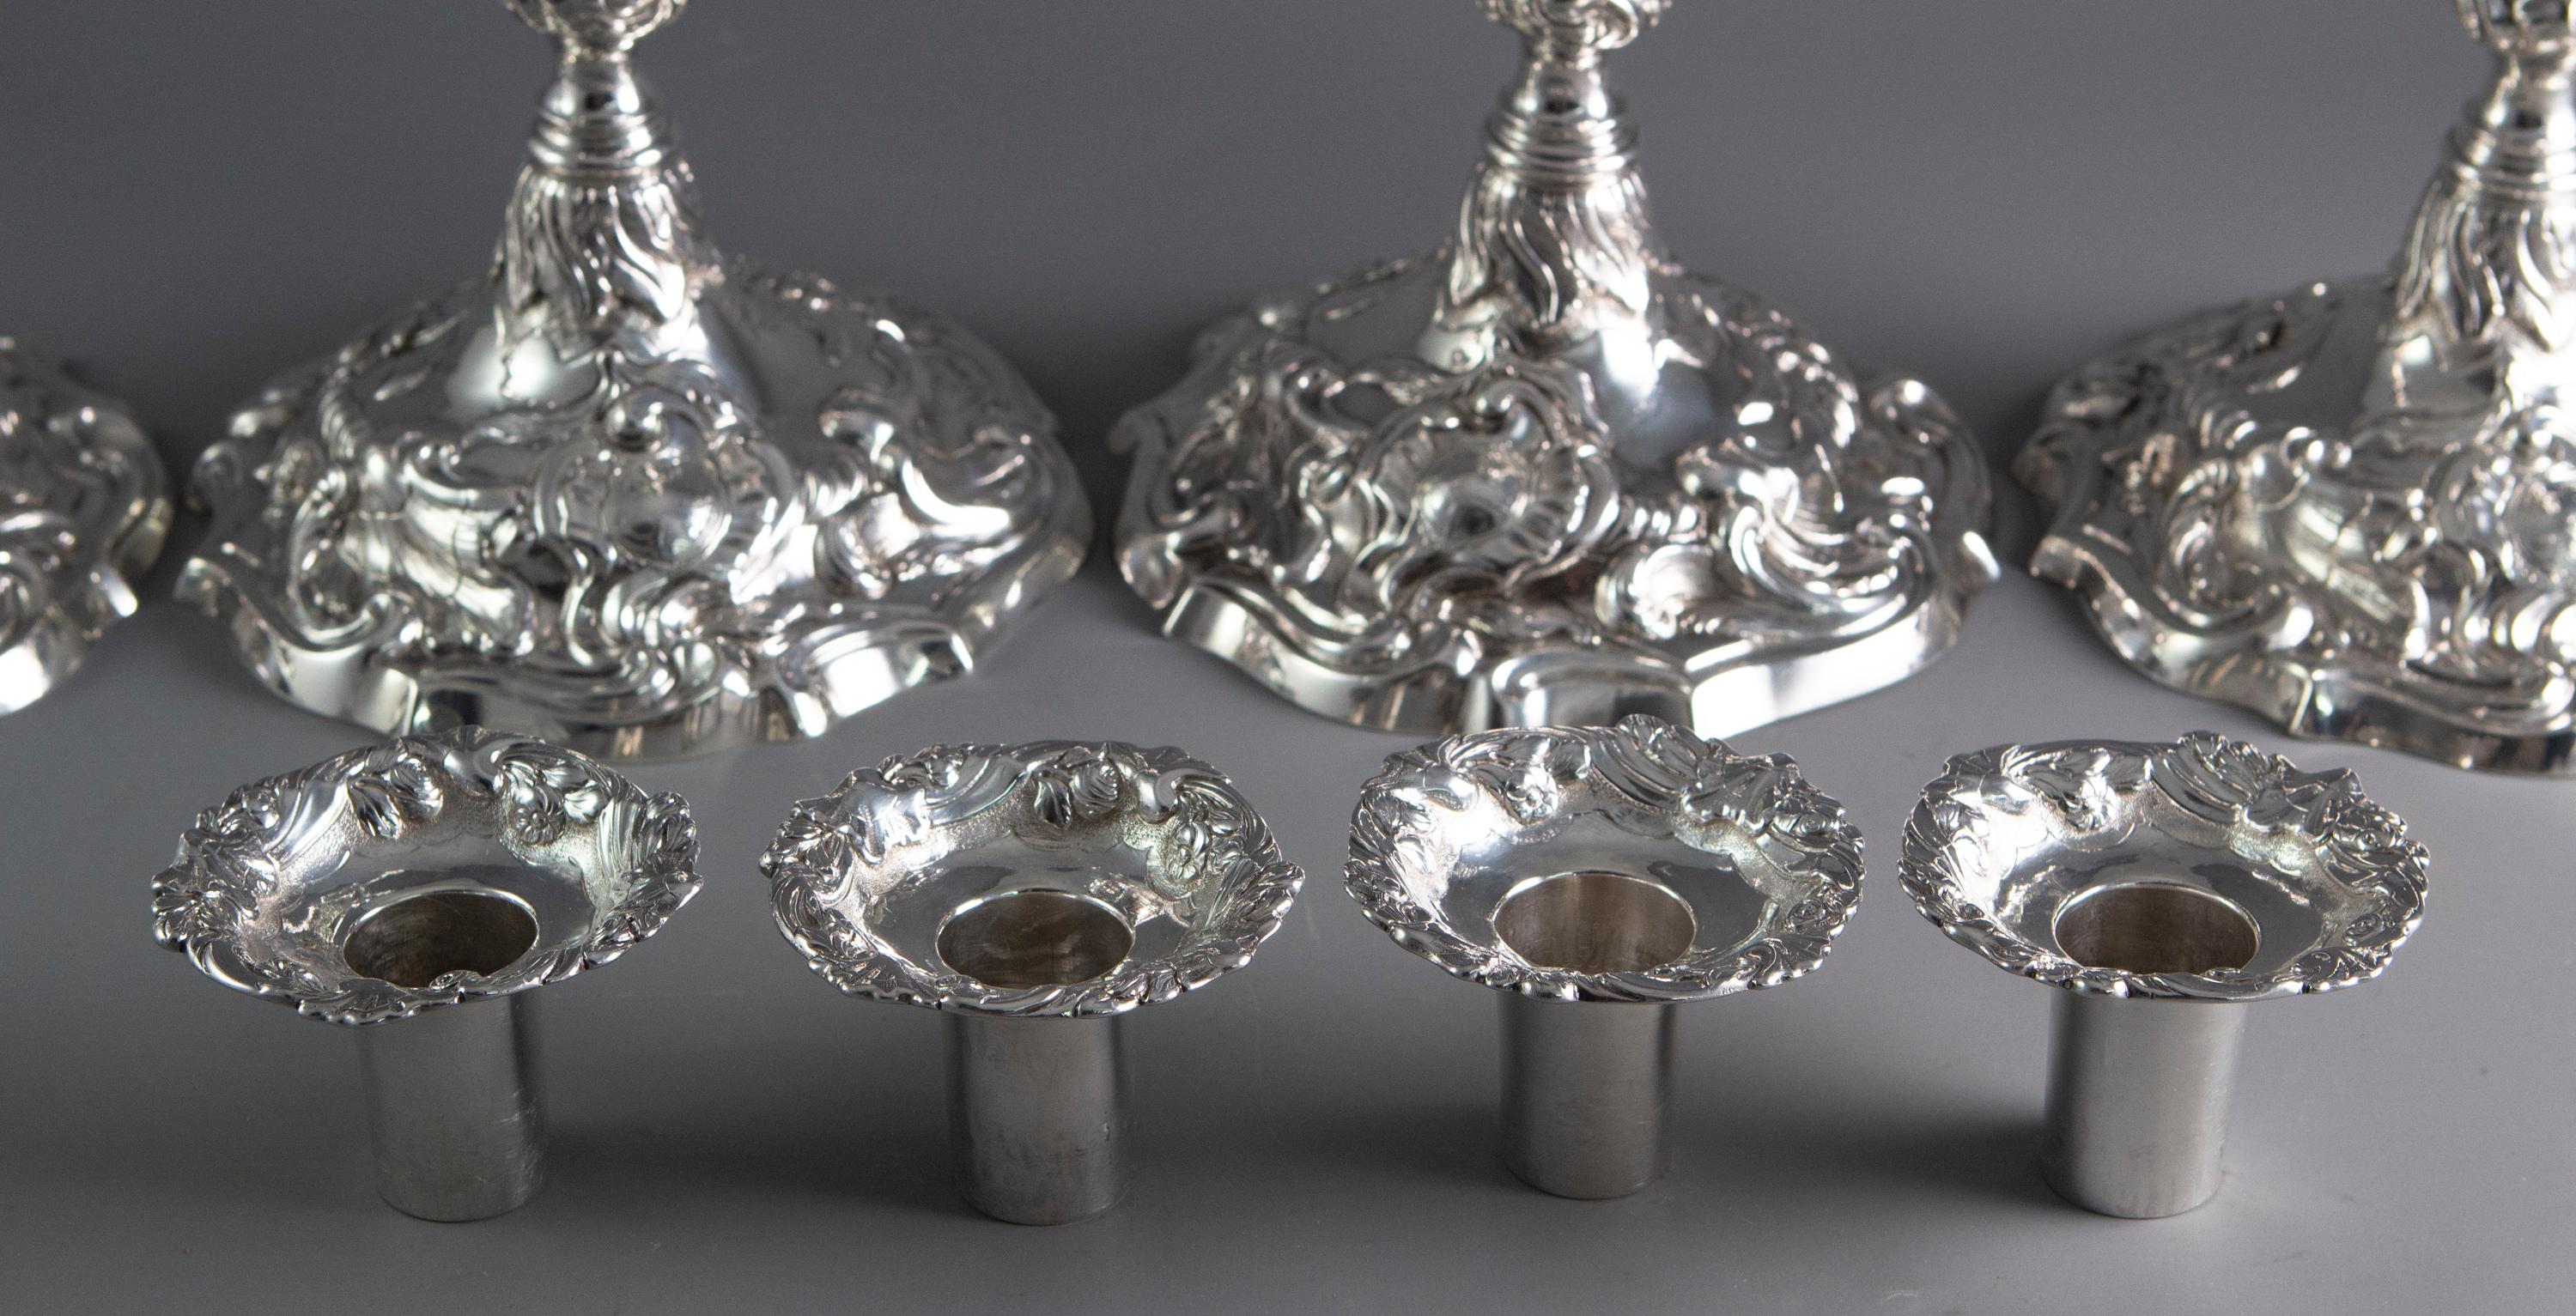 A Set of 4 George II Cast Silver Candlesticks, London 1753 by John Cafe 1